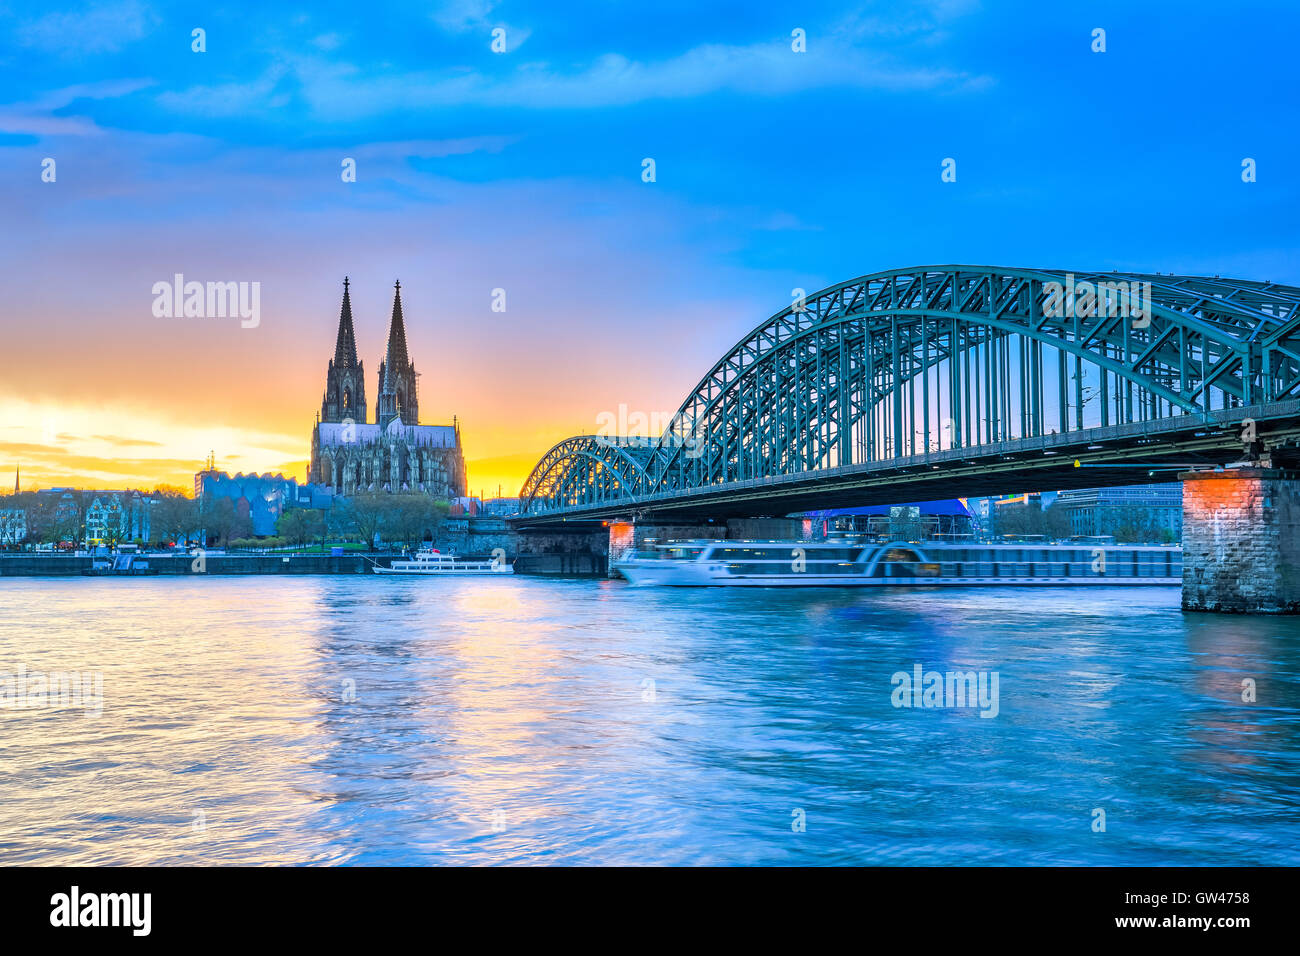 The Cologne Cathedral in Cologne, Germany. Stock Photo